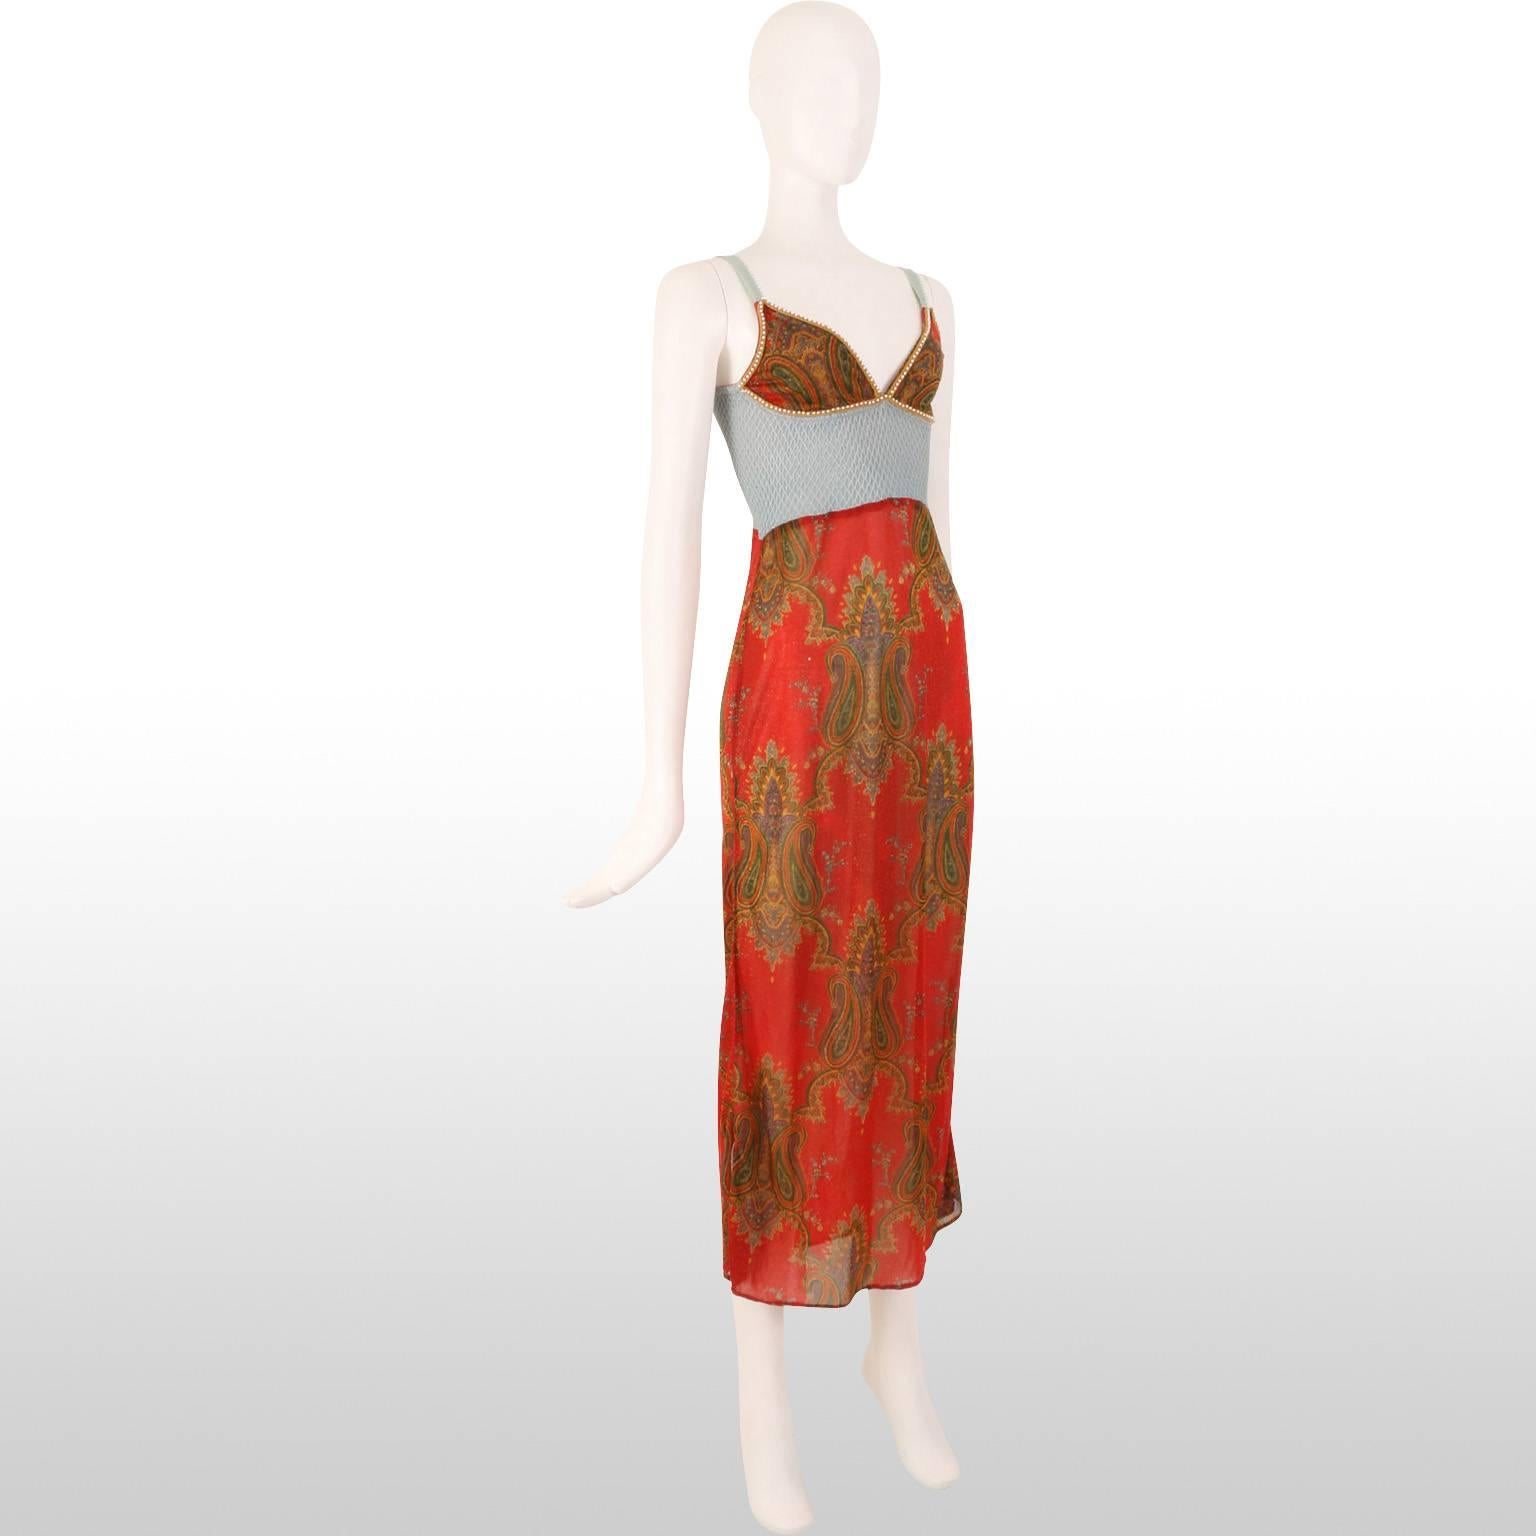 This lovely paisley print maxi dress by Voyage with its burnt orange and autumnal colour palette offers a unique take on the maxi dress. The metallic thread running throughout the entirety of the garment gives the dress an interesting sheen, while